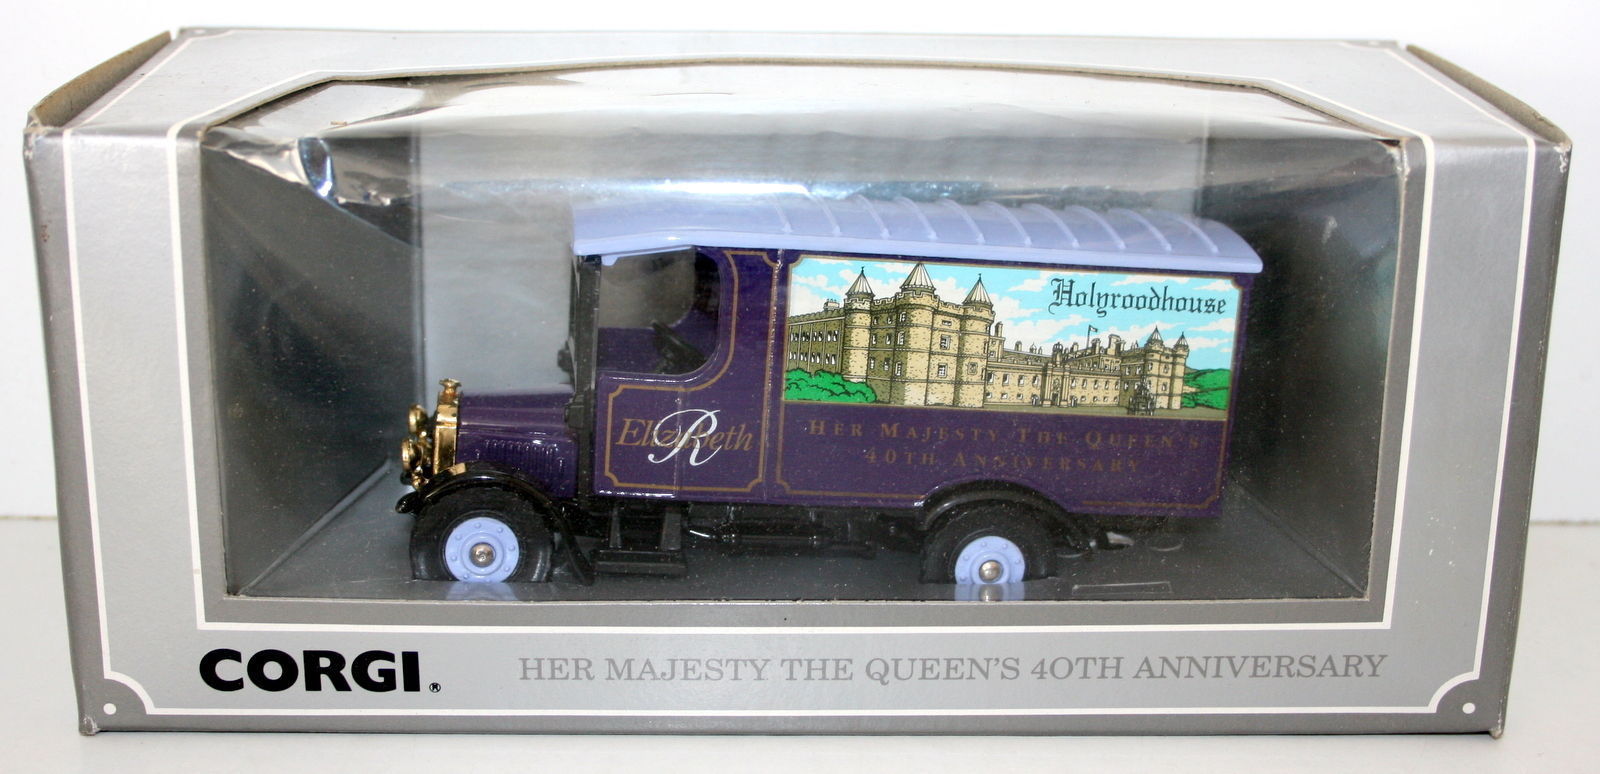 CORGI - 97153 HER MAJESTY THE QUEEN'S 40TH ANNY - HOLYROOD ROUSE THORNYCROFT VAN